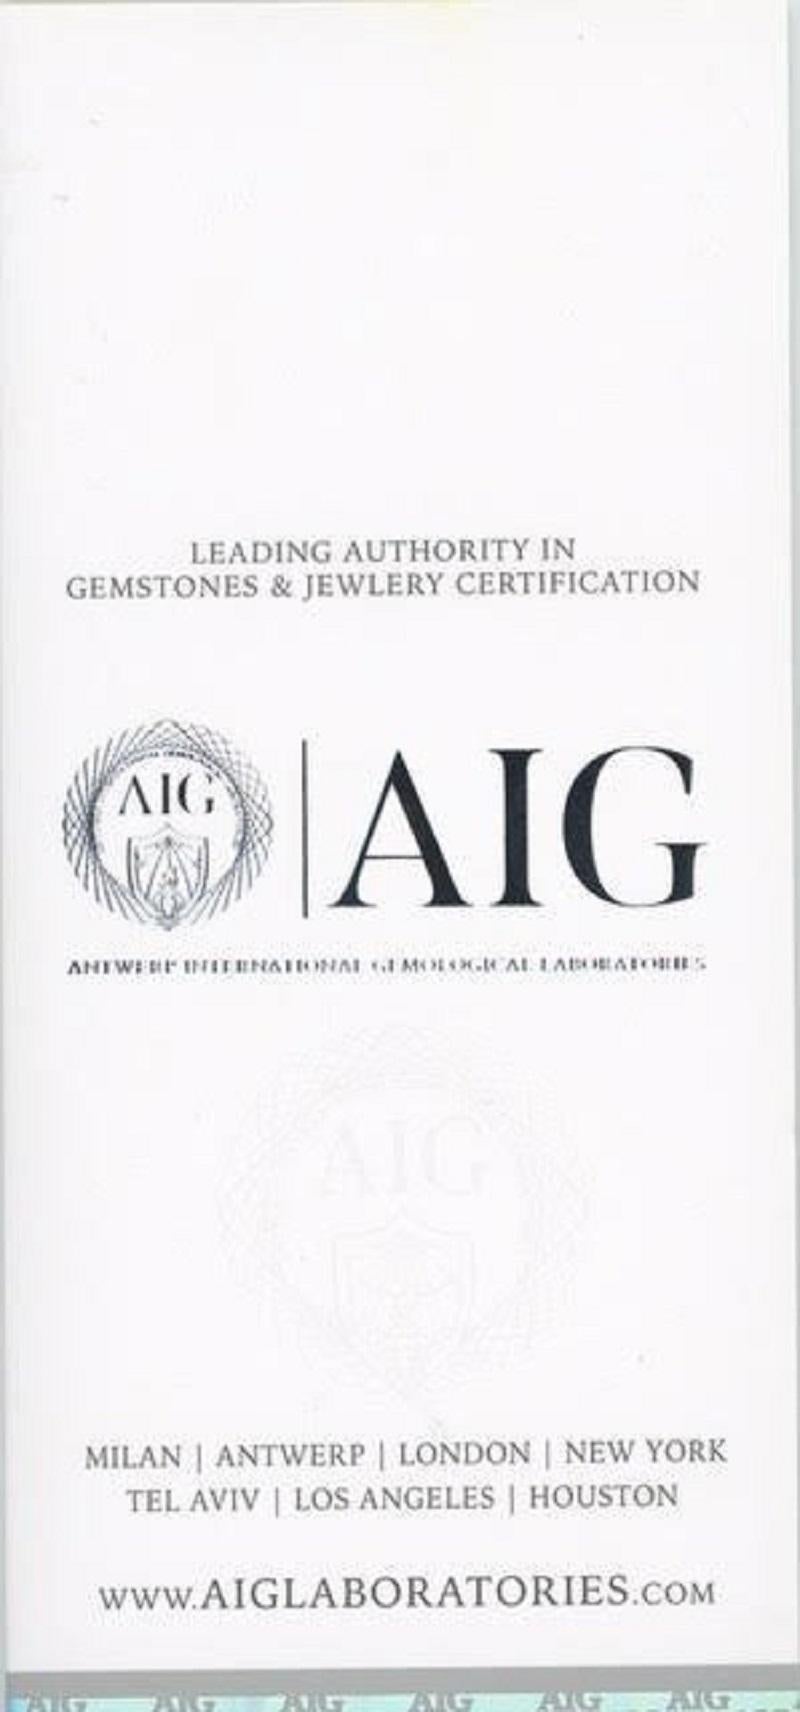 14k Yellow Gold Solitaire Ring w/ 0.30 ct Natural Diamonds - AIG Certificate 6